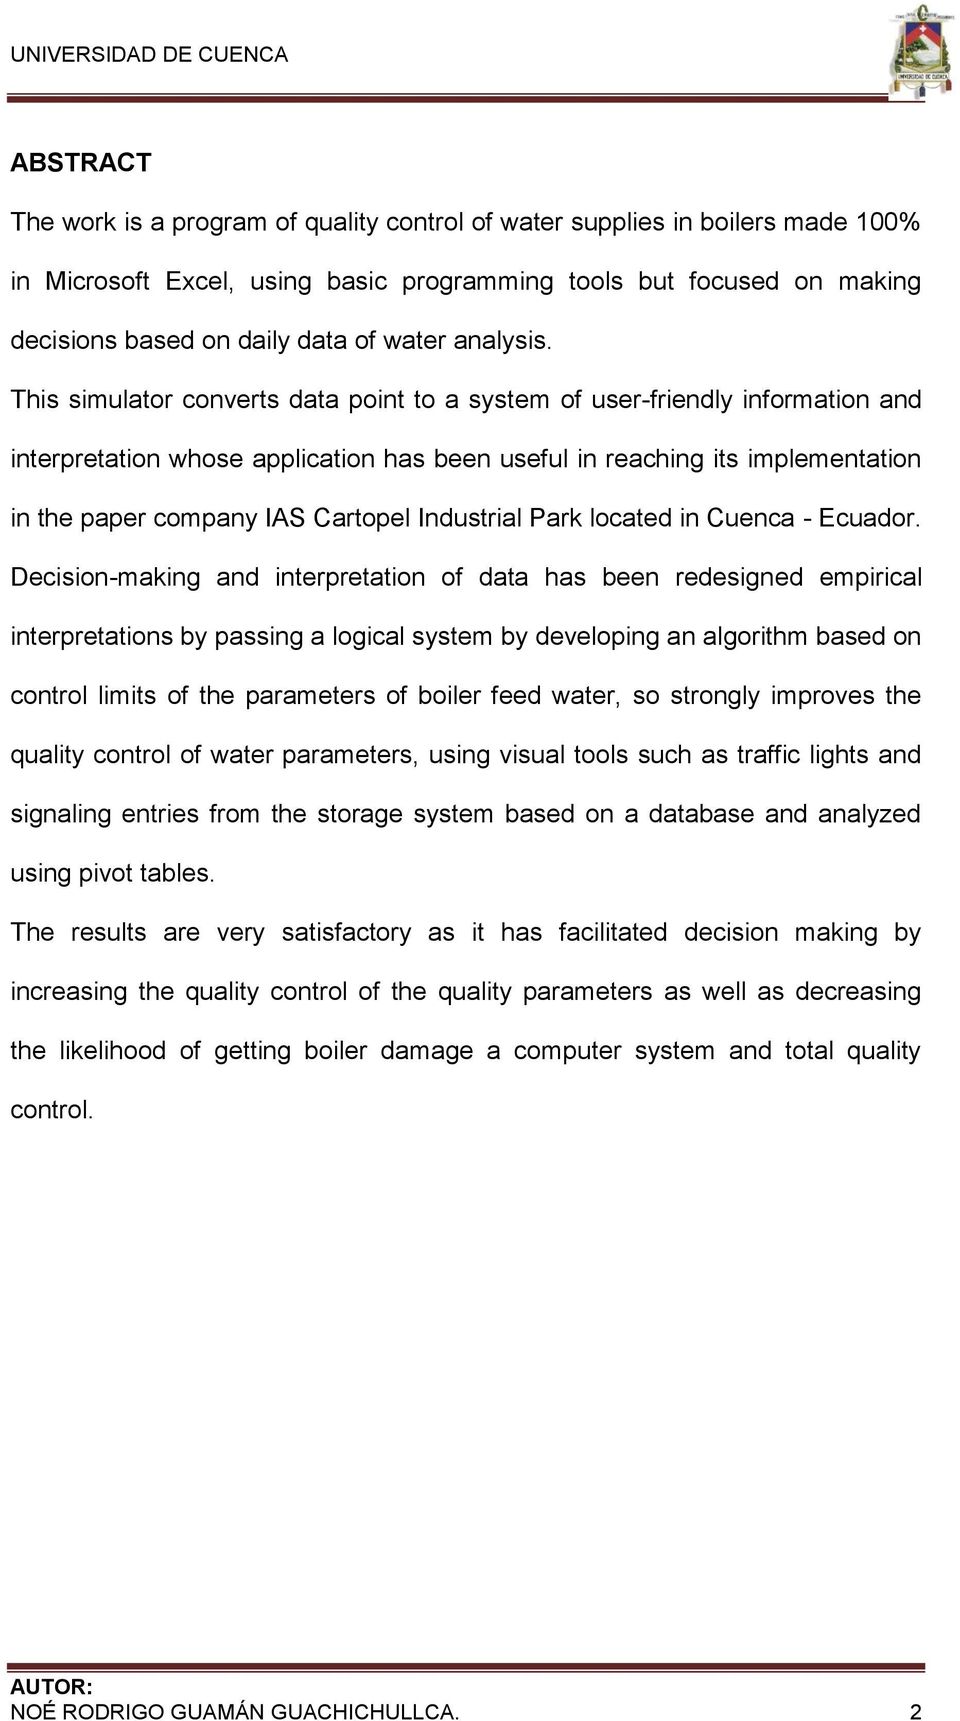 This simulator converts data point to a system of user-friendly information and interpretation whose application has been useful in reaching its implementation in the paper company IAS Cartopel